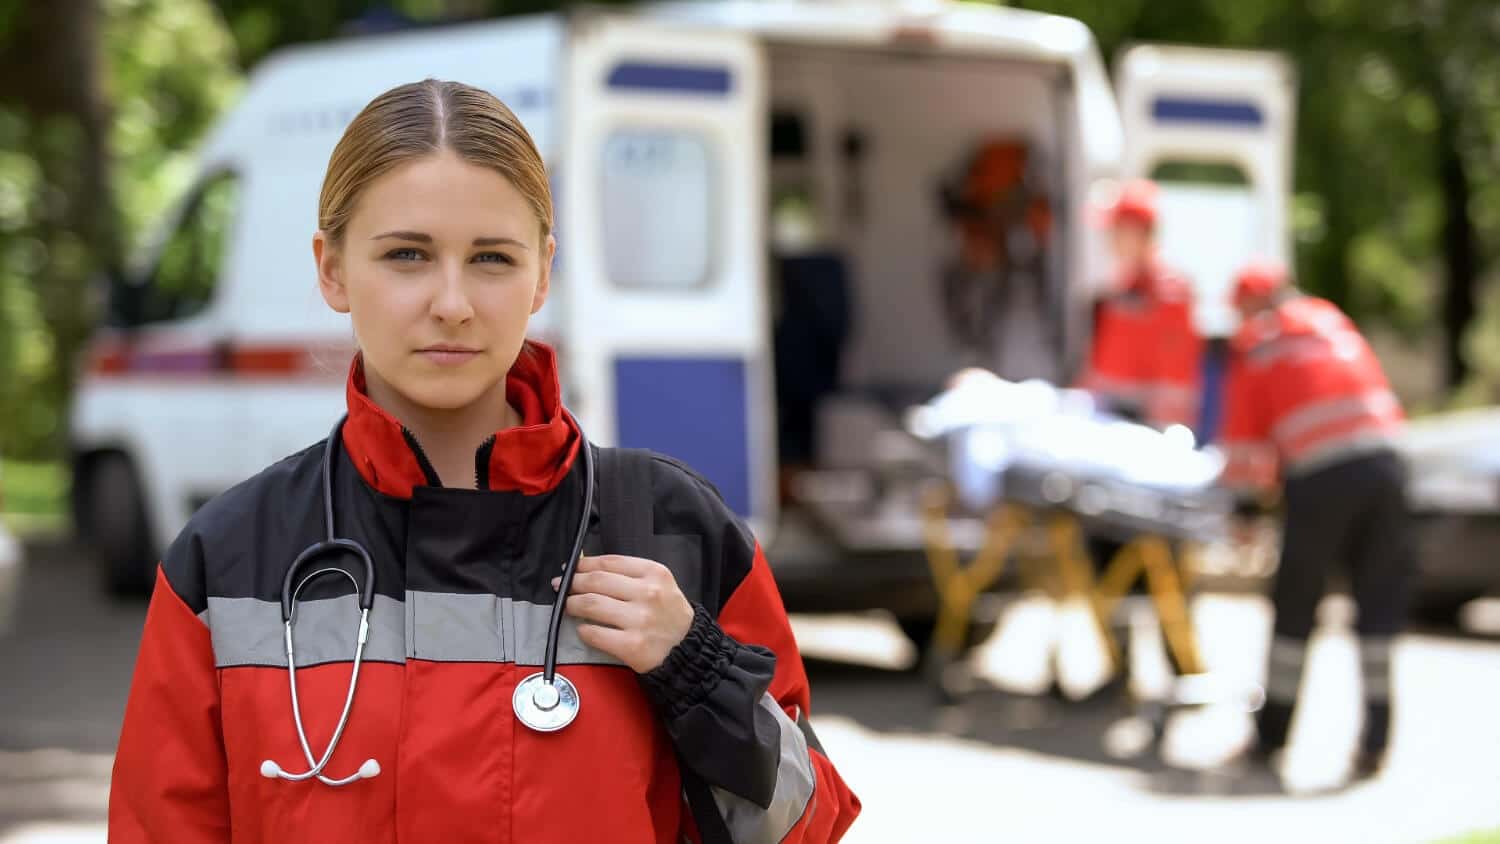 The vital role ambulance services play in saving lives